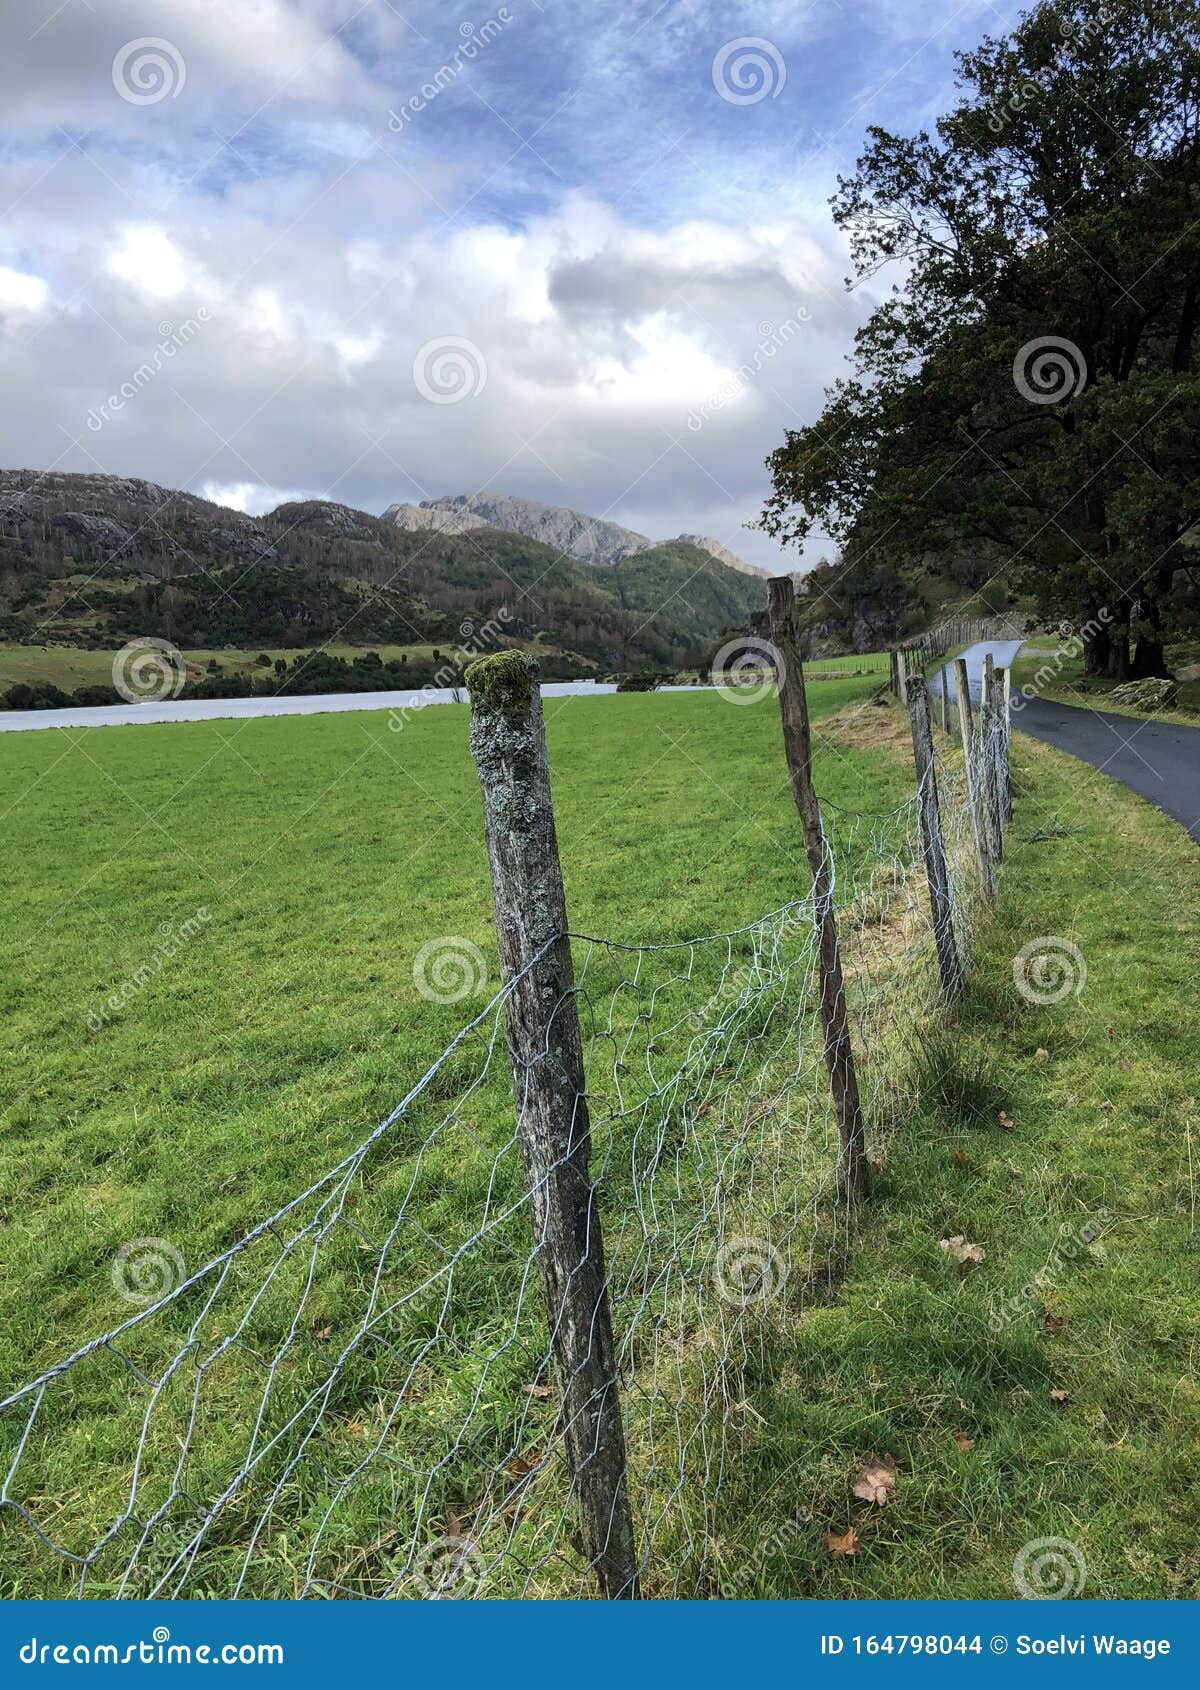 fence at the contry side of norway